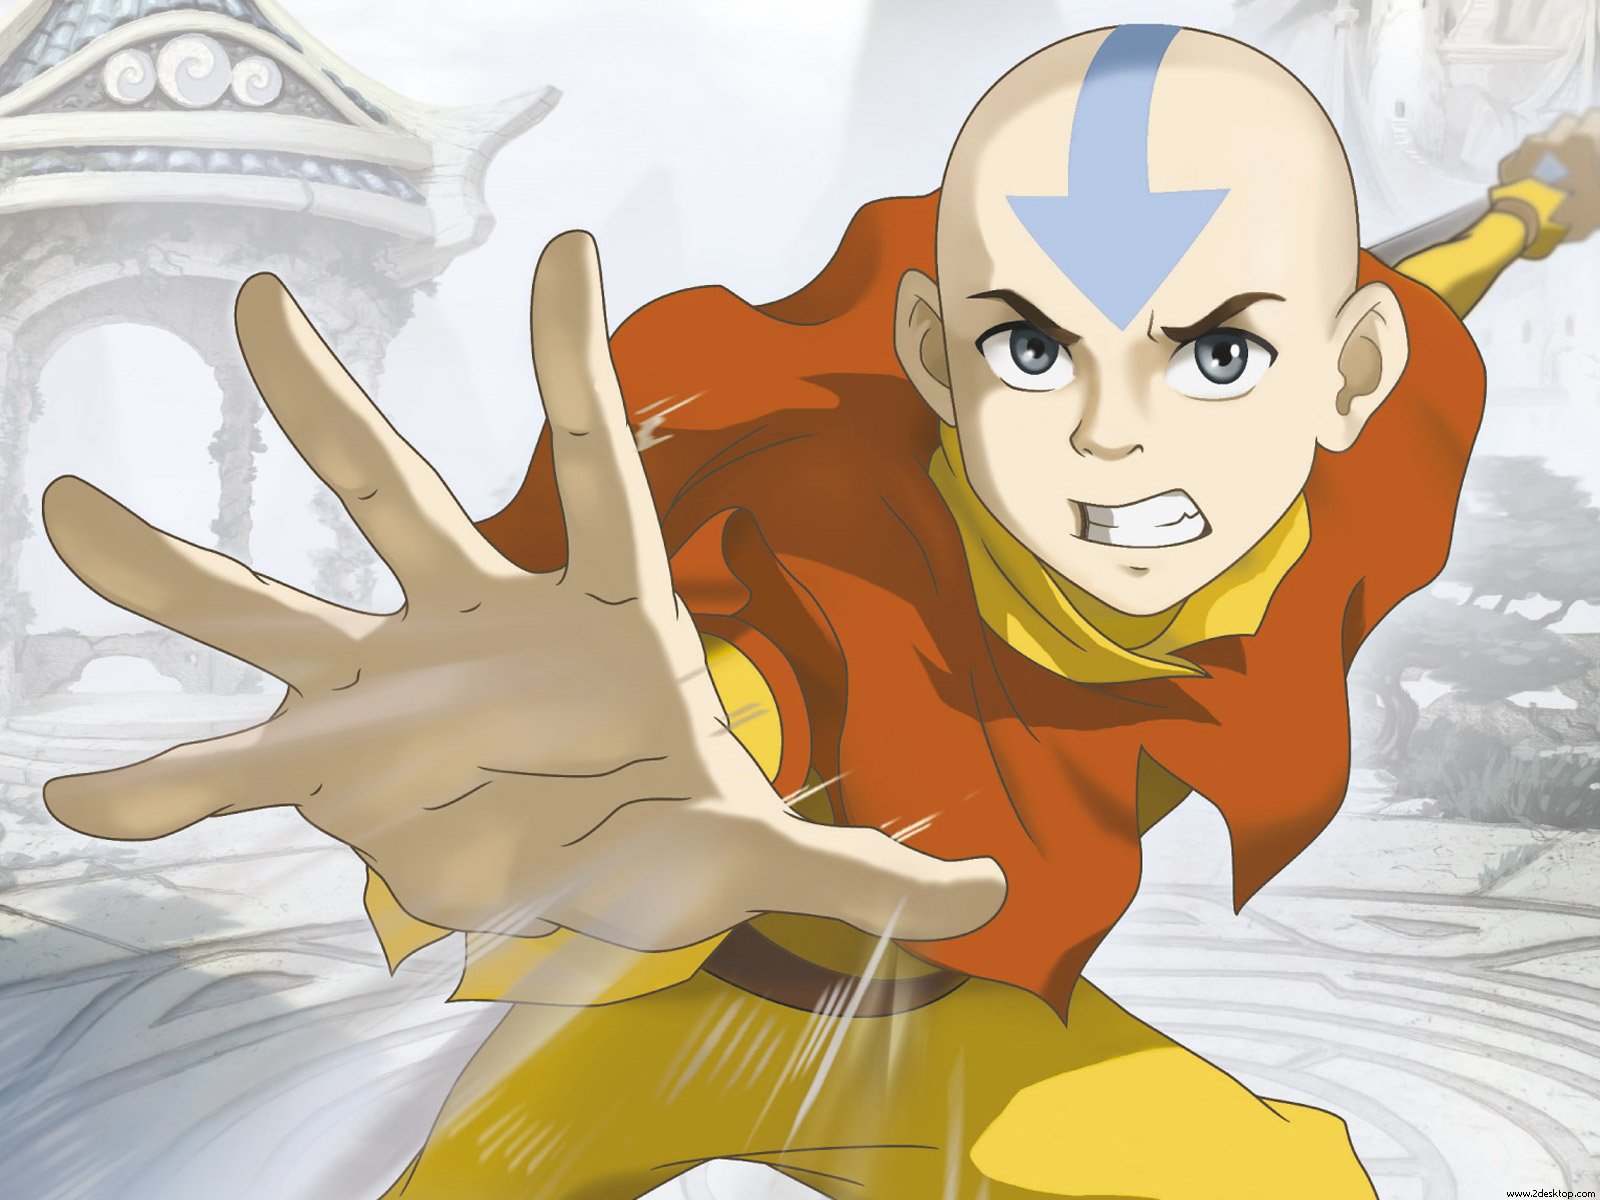 Aang, the protagonist of Avatar, stands confidently in a vibrant high-definition desktop wallpaper.